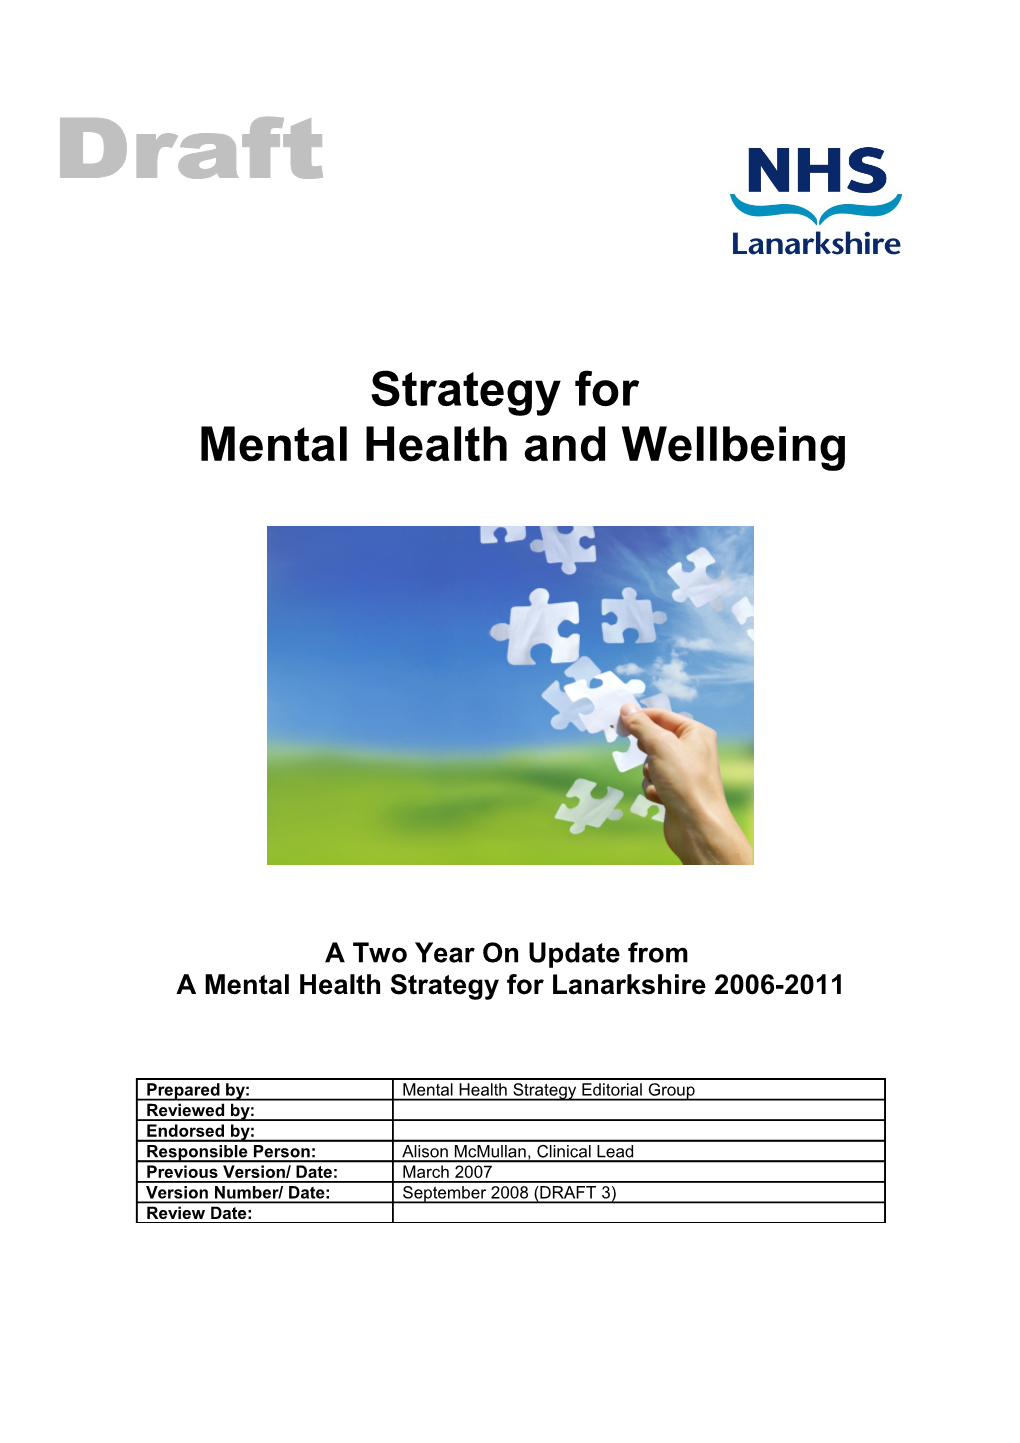 Mental Health and Wellbeing